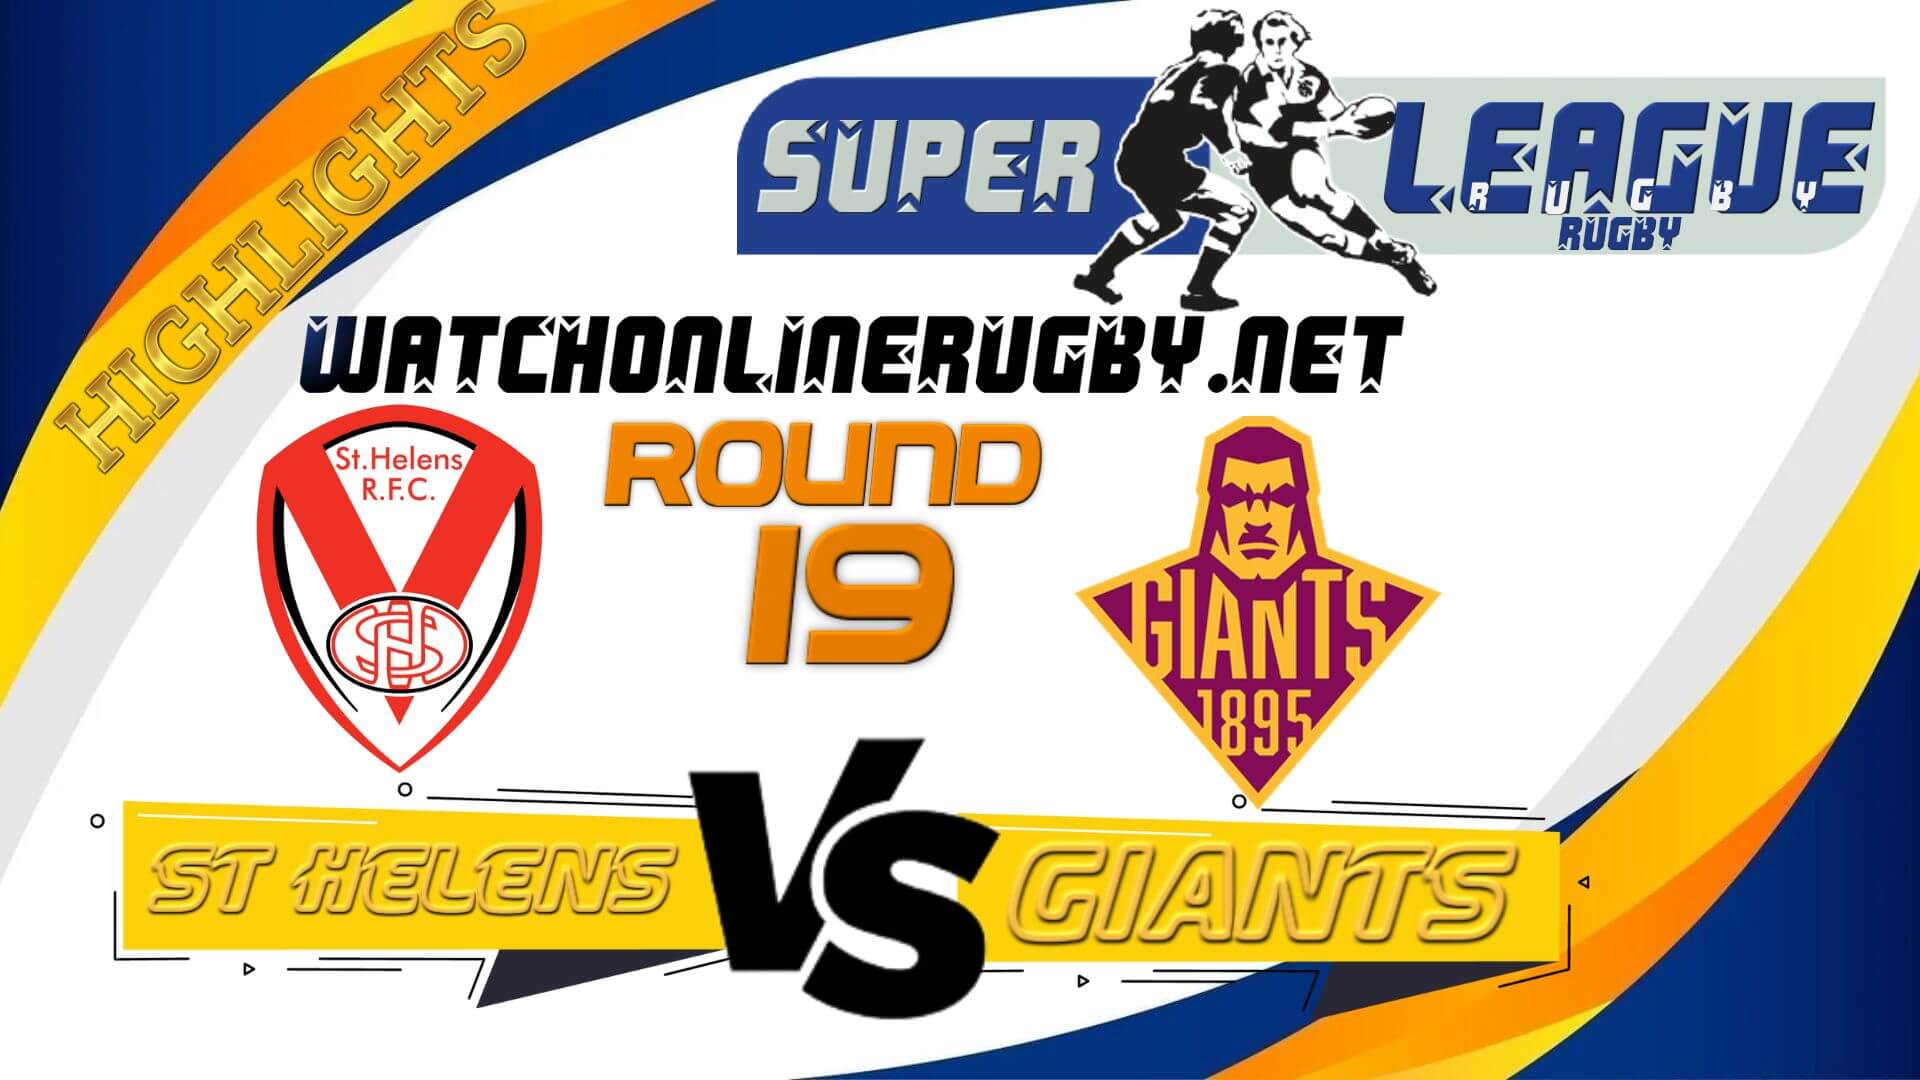 St Helens Vs Huddersfield Giants Super League Rugby 2022 RD 19